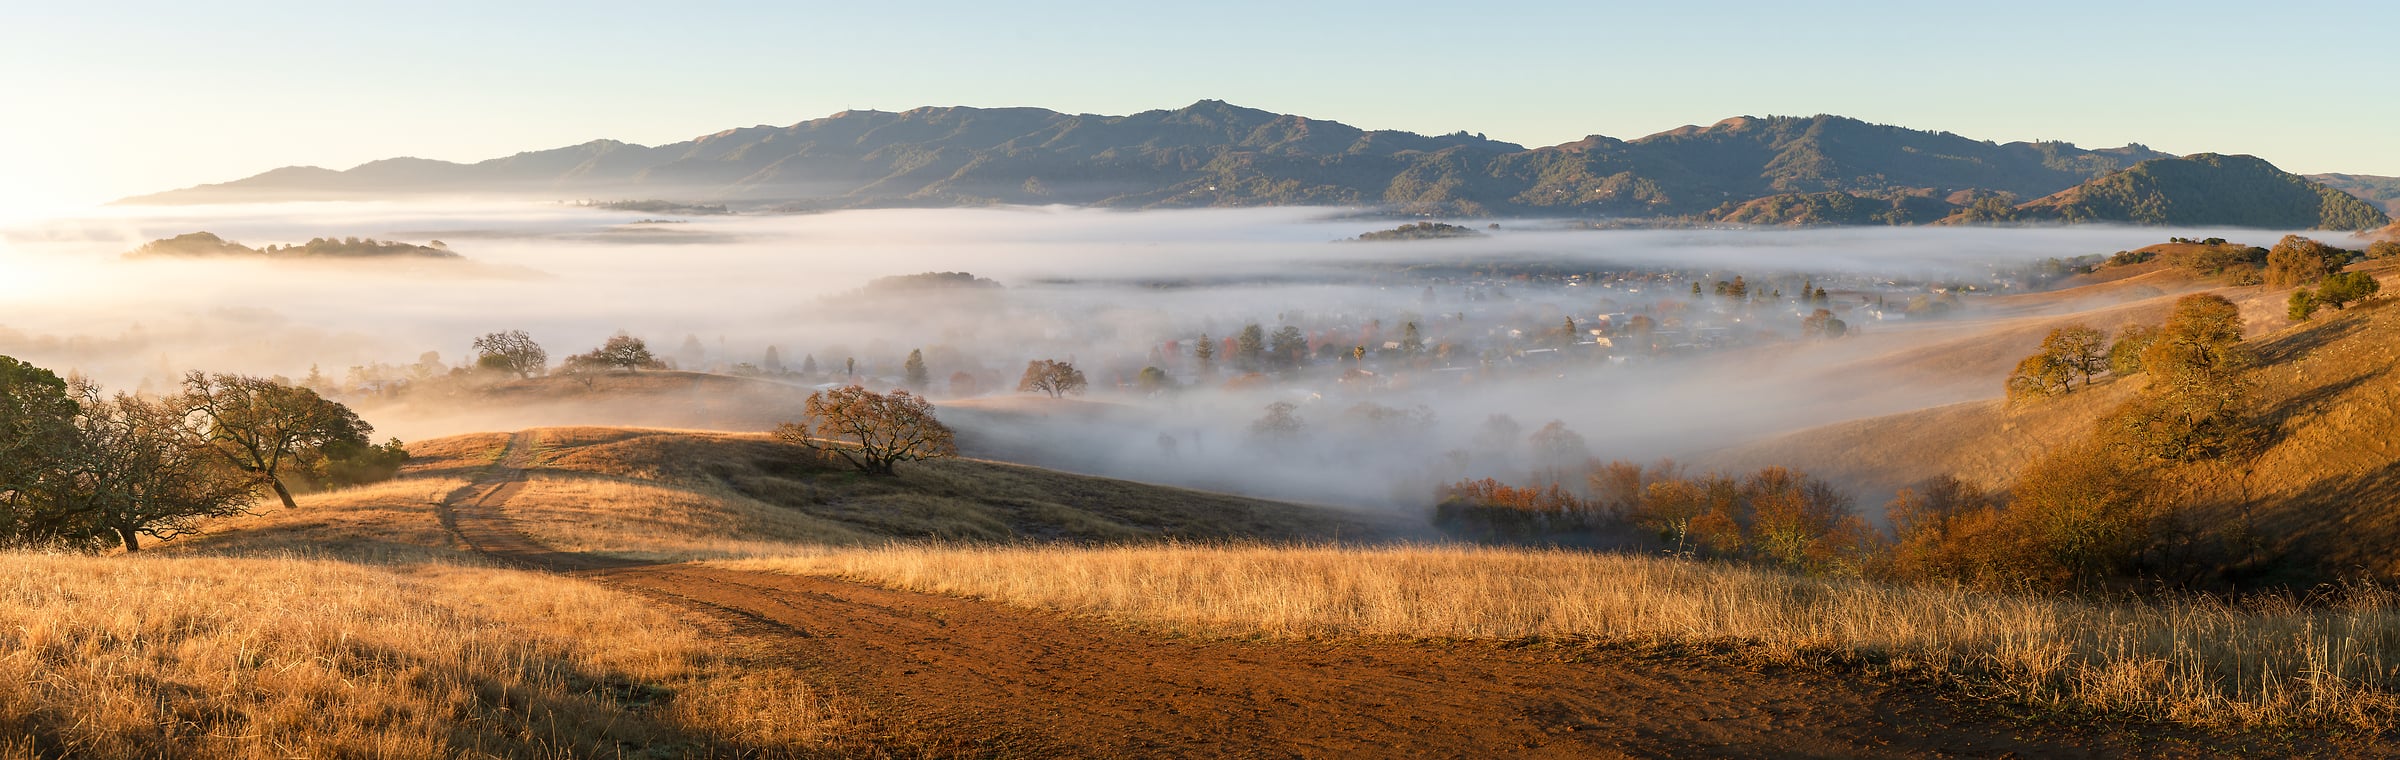 218 megapixels! A very high resolution, large-format VAST photo print of hills, a walking trail, golden grass, fog and distant mountains on beautiful morning with the sun rising; landscape photograph created by Jeff Lewis in Marin County, California.